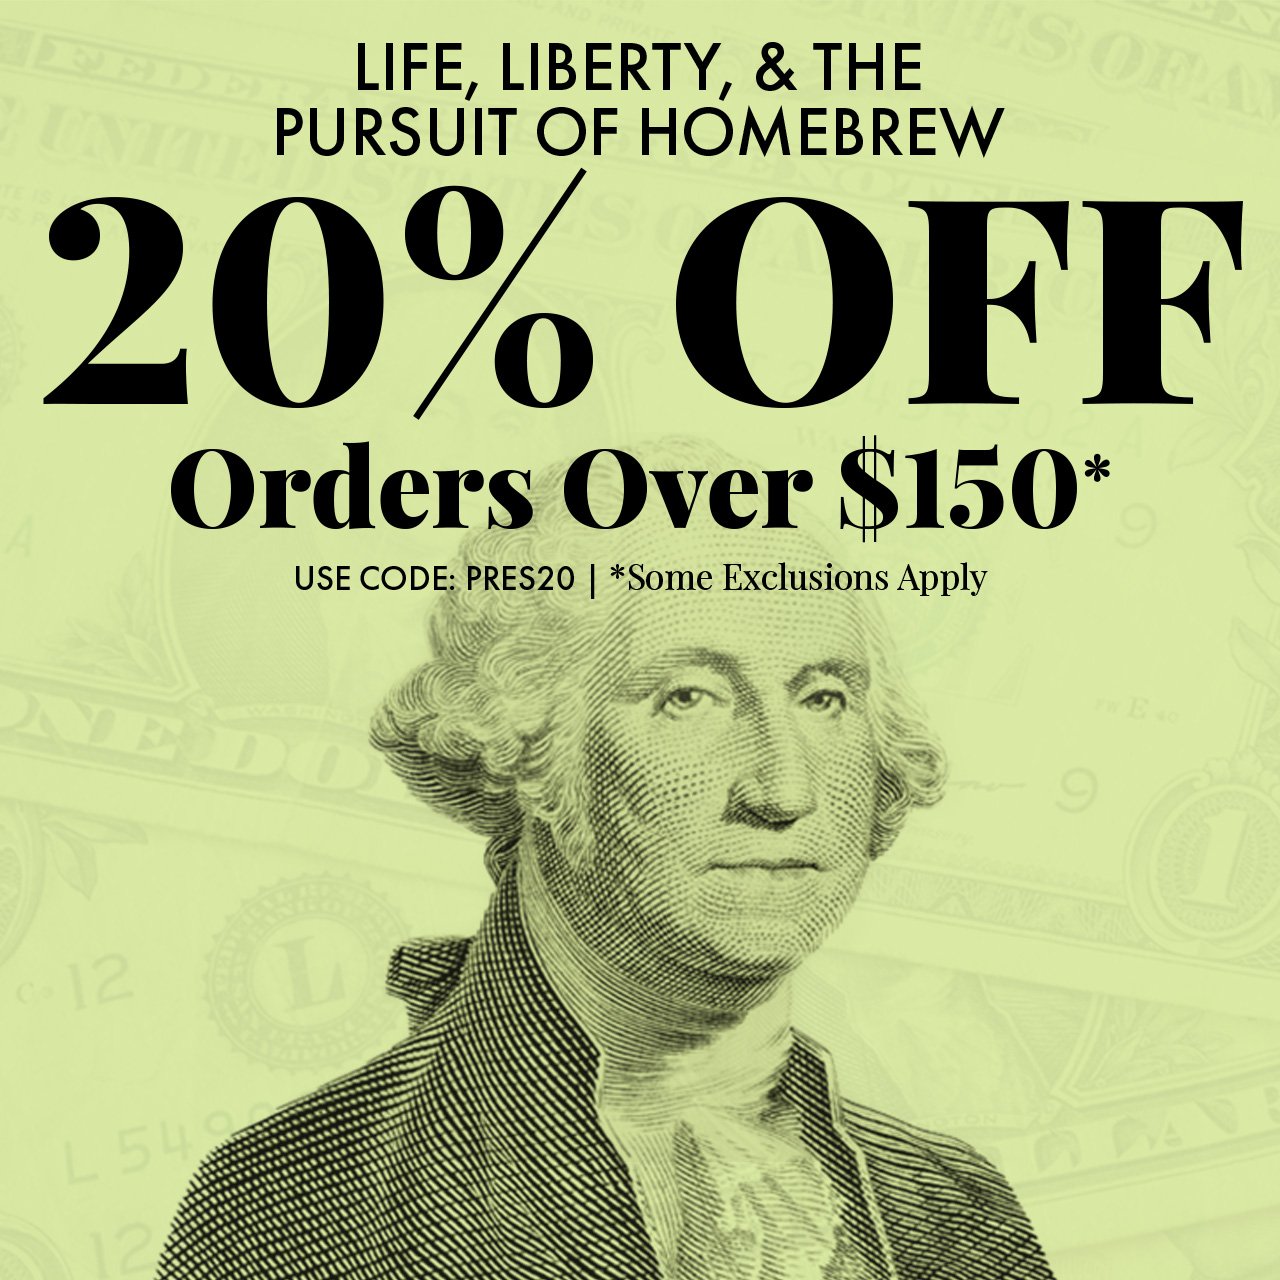 Life, Liberty, and the Pursuit of Homebrew. 20% OFF Orders Over \\$150. Use code PRES20